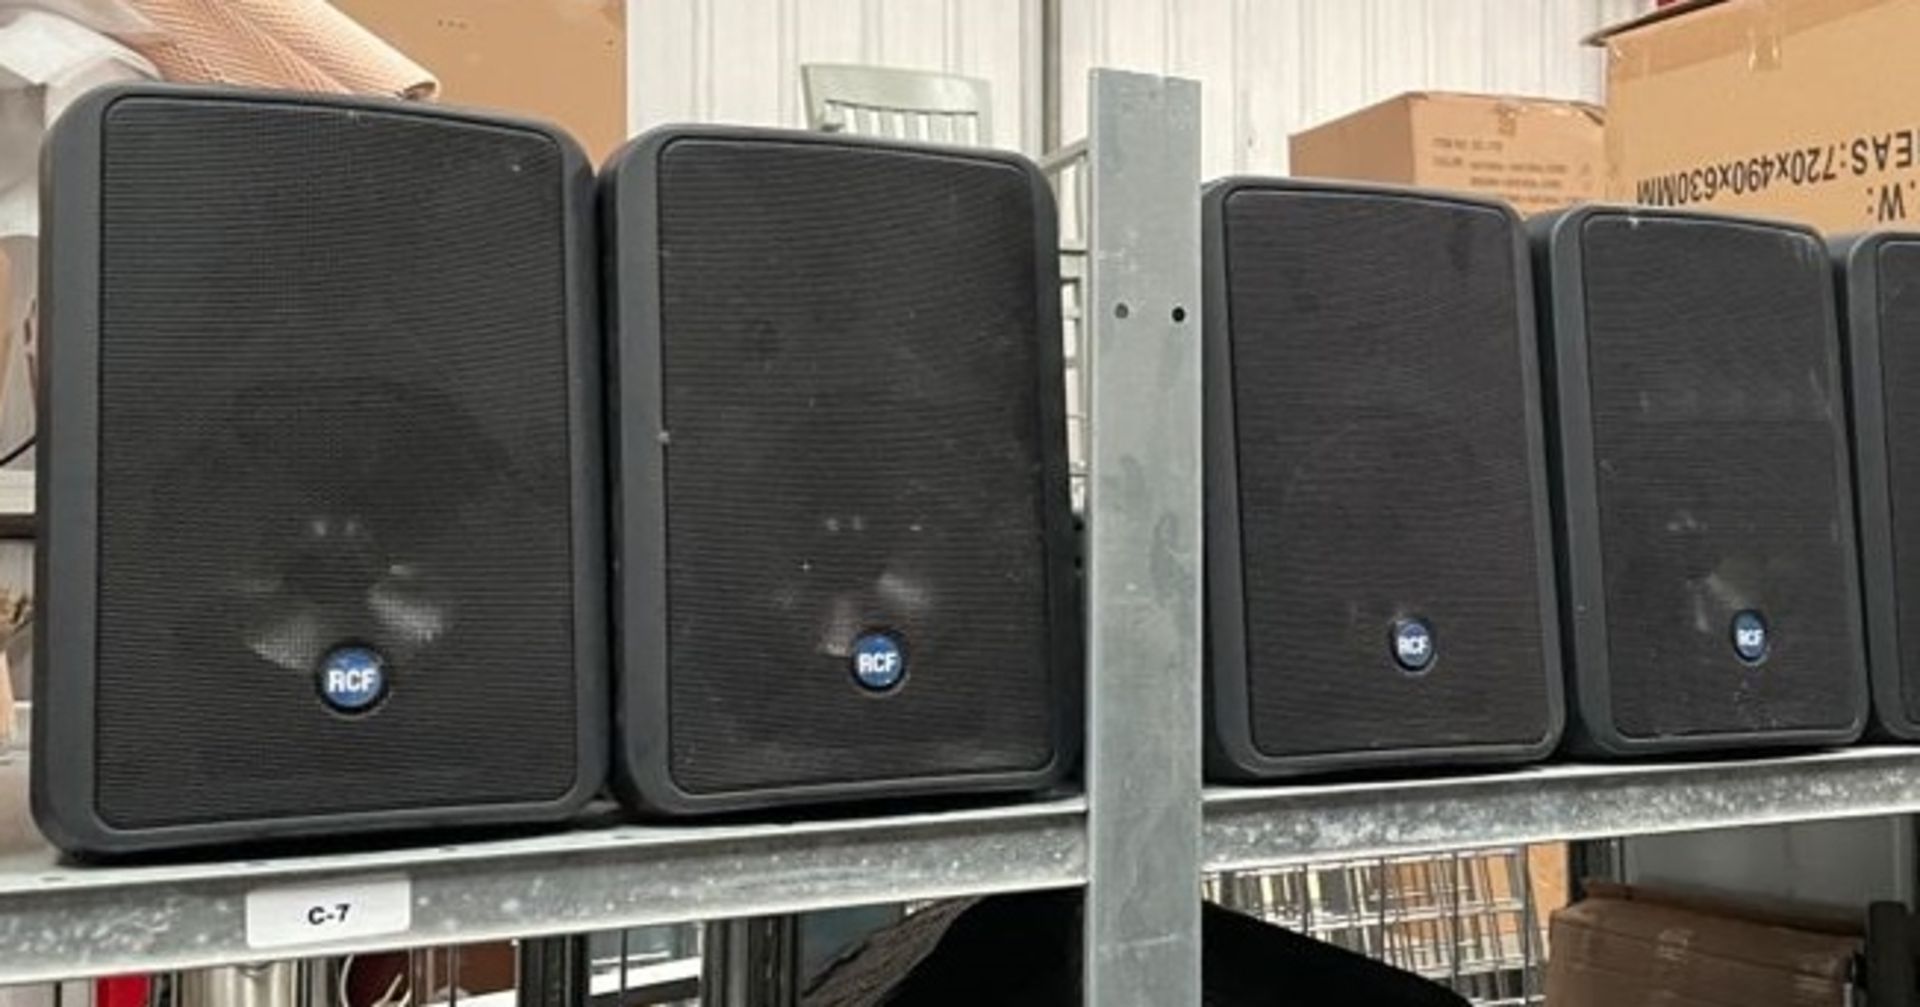 4 x RCF 175-Watt Two-Way Compact Monitor Speakers - Model Monitor 55 - RRP £492 - Ref: WH3 - CL999 -